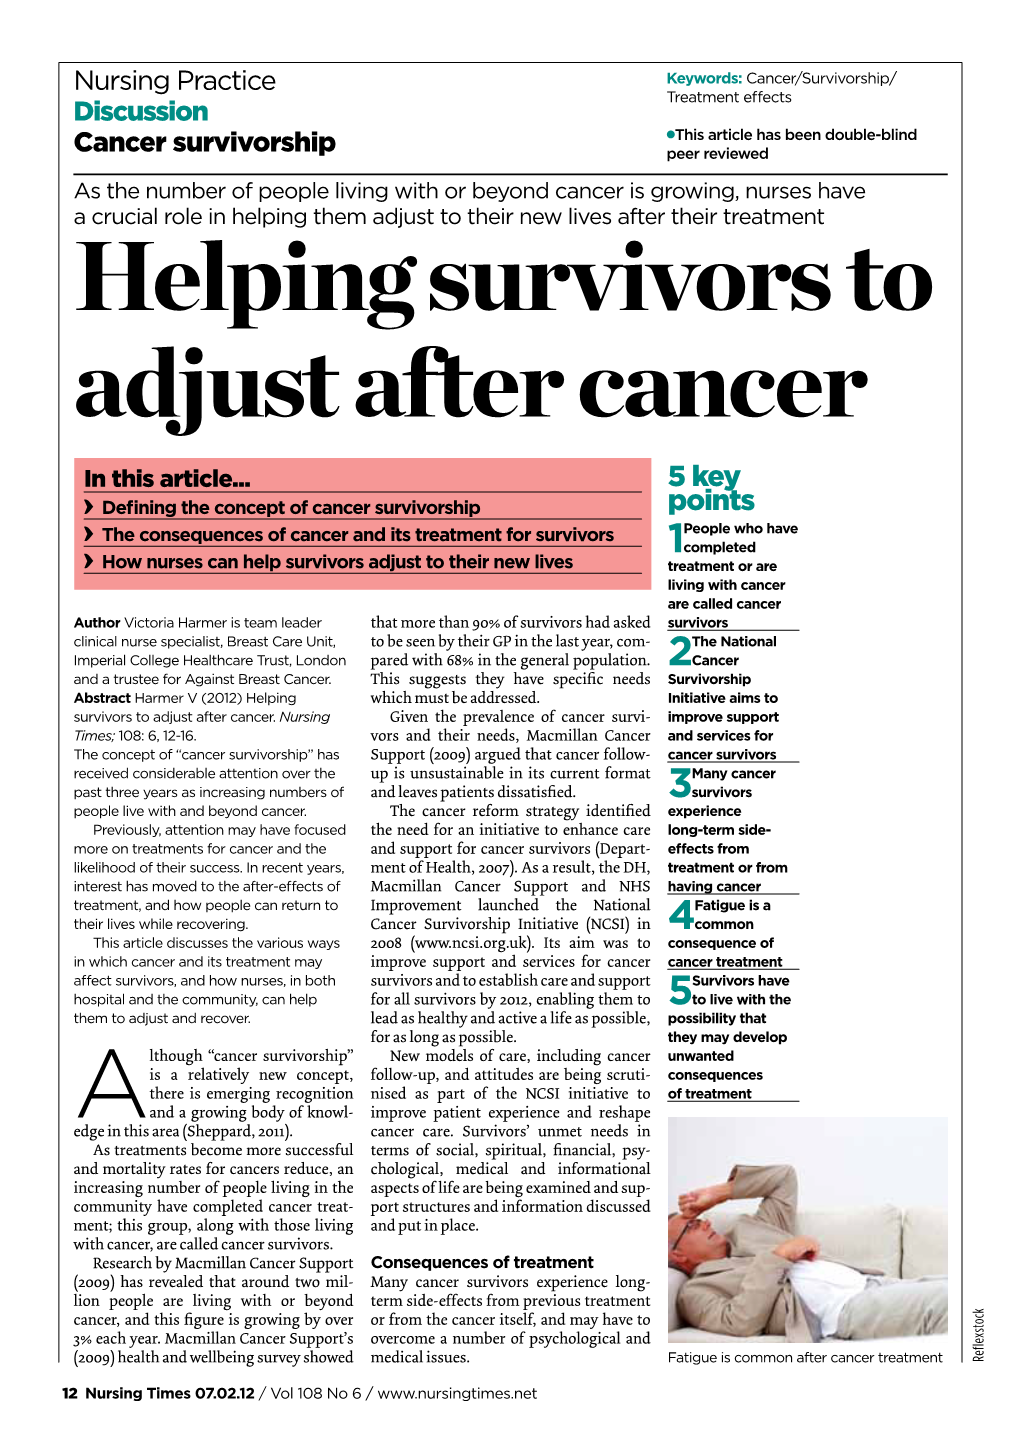 Helping Survivors to Adjust After Cancer in This Article